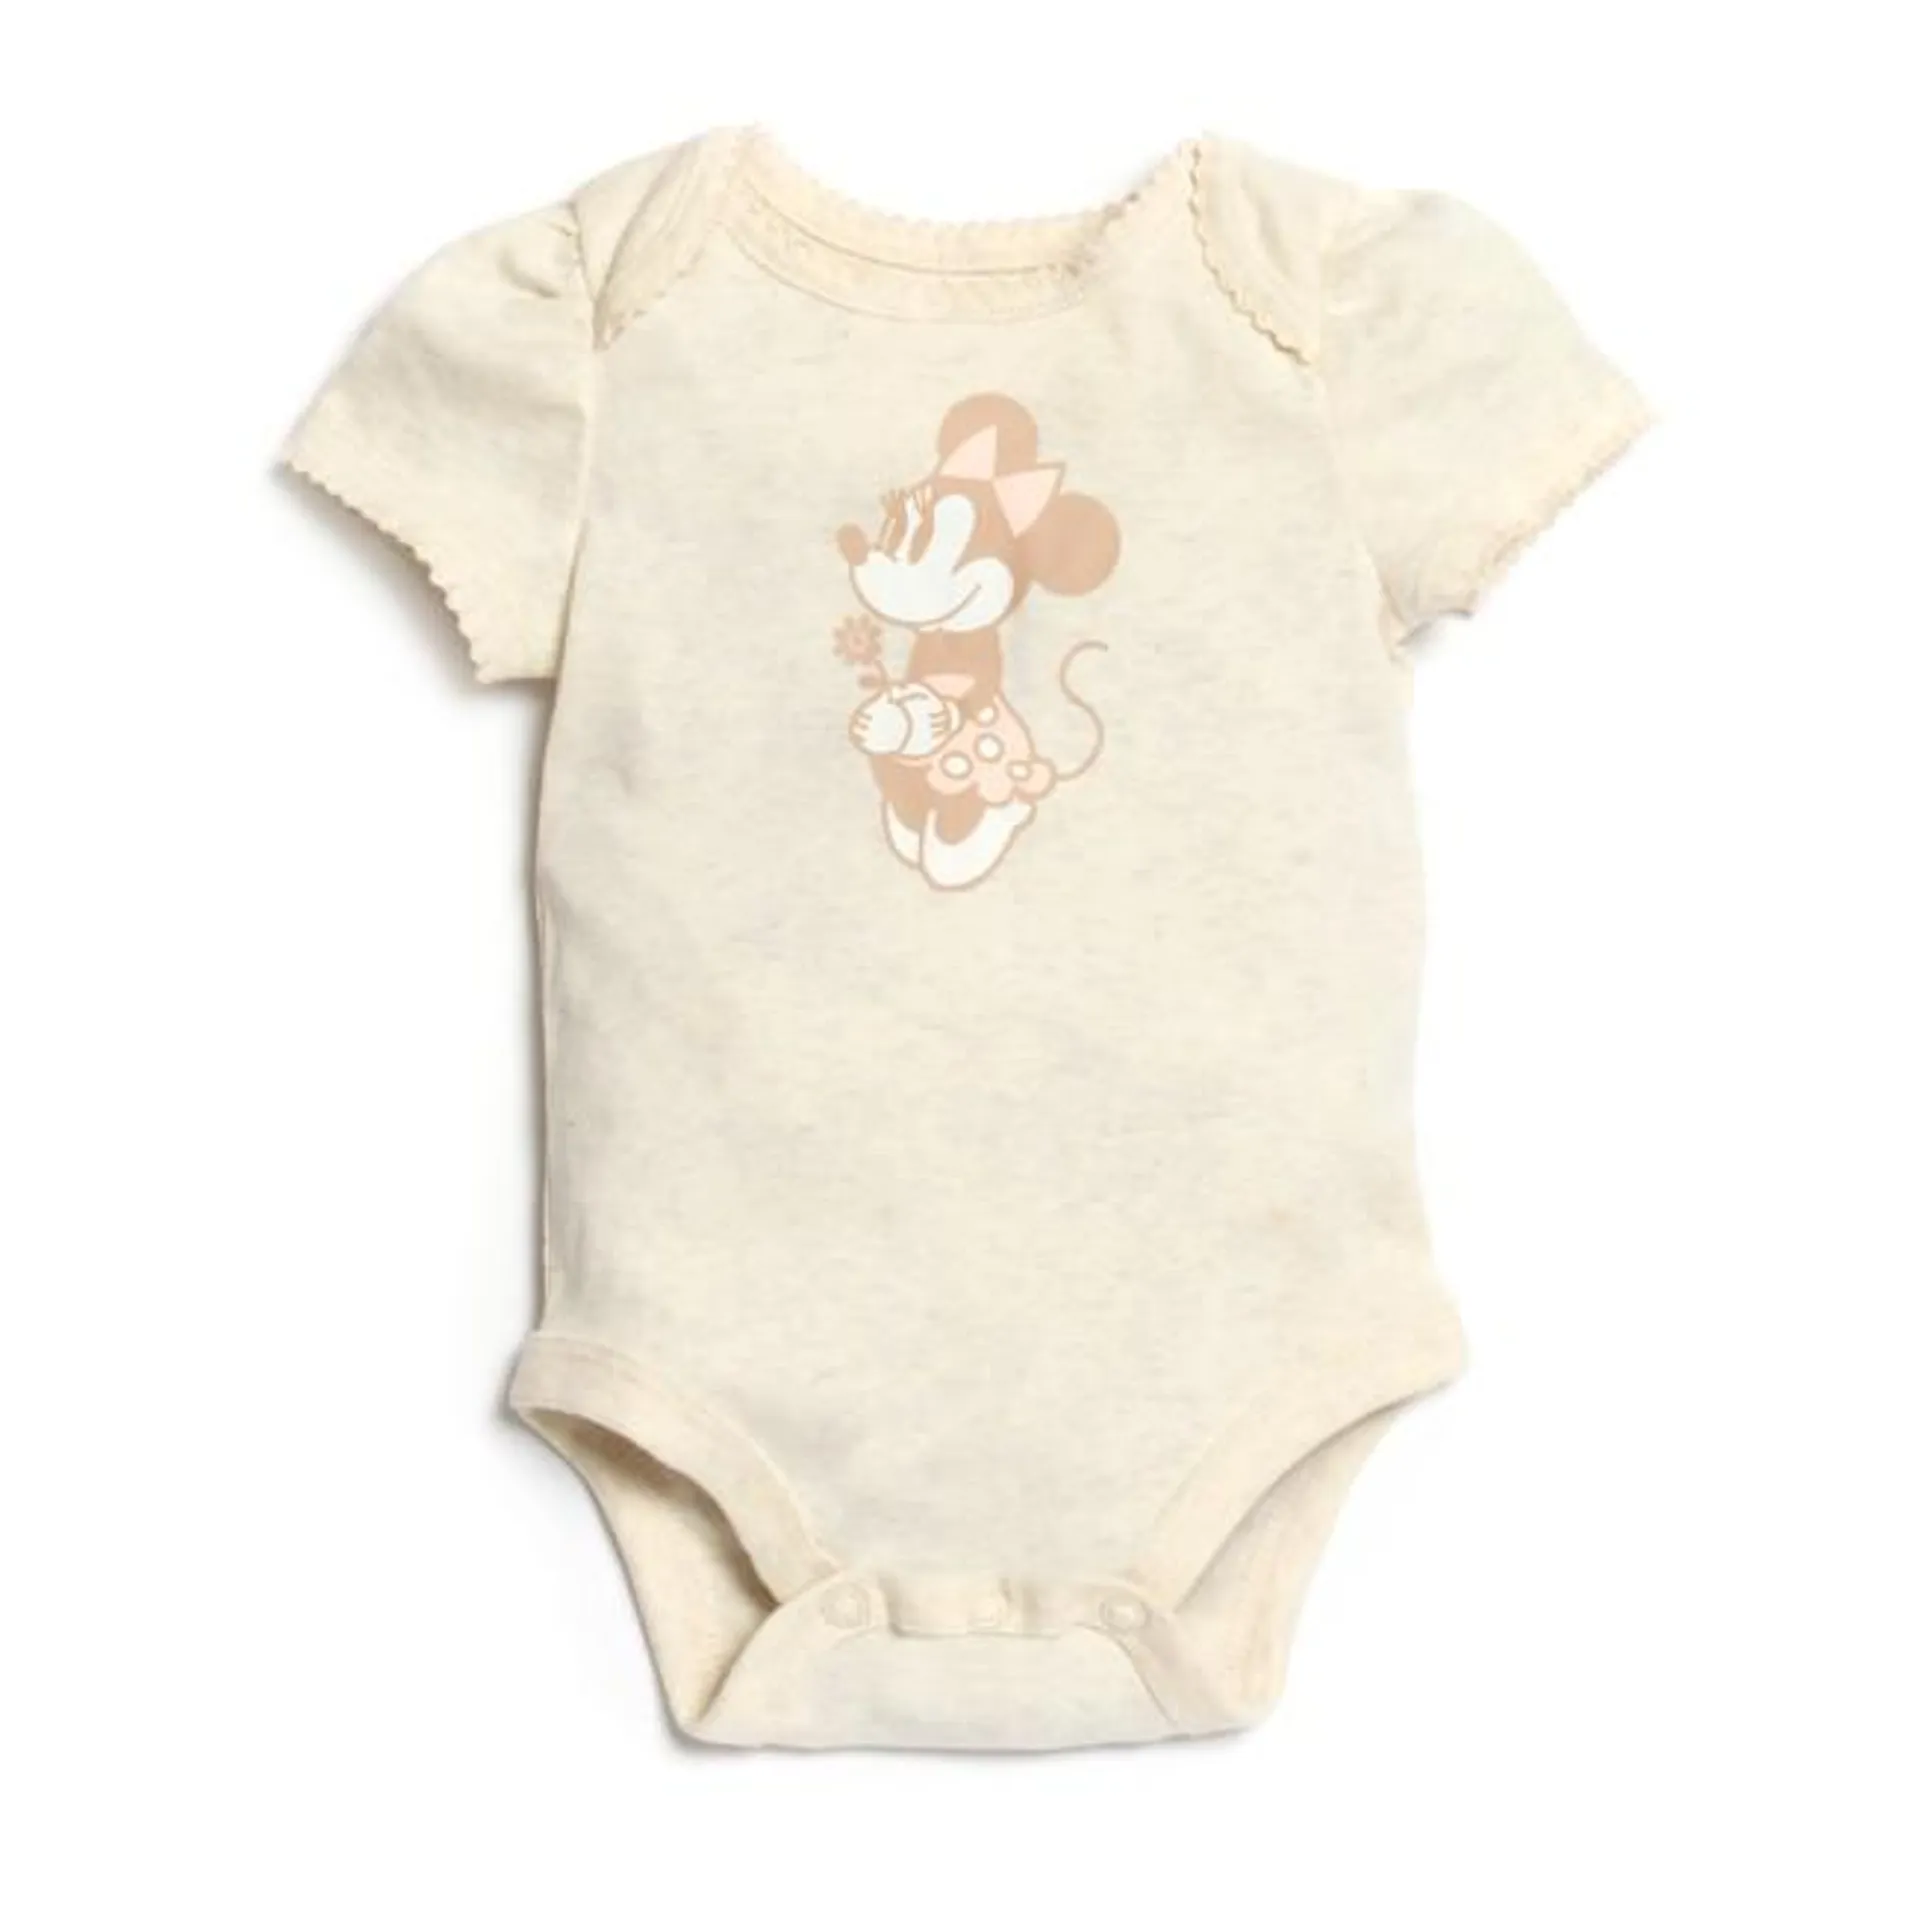 Disney Store Minnie Mouse Baby Body Suits, Set of 3